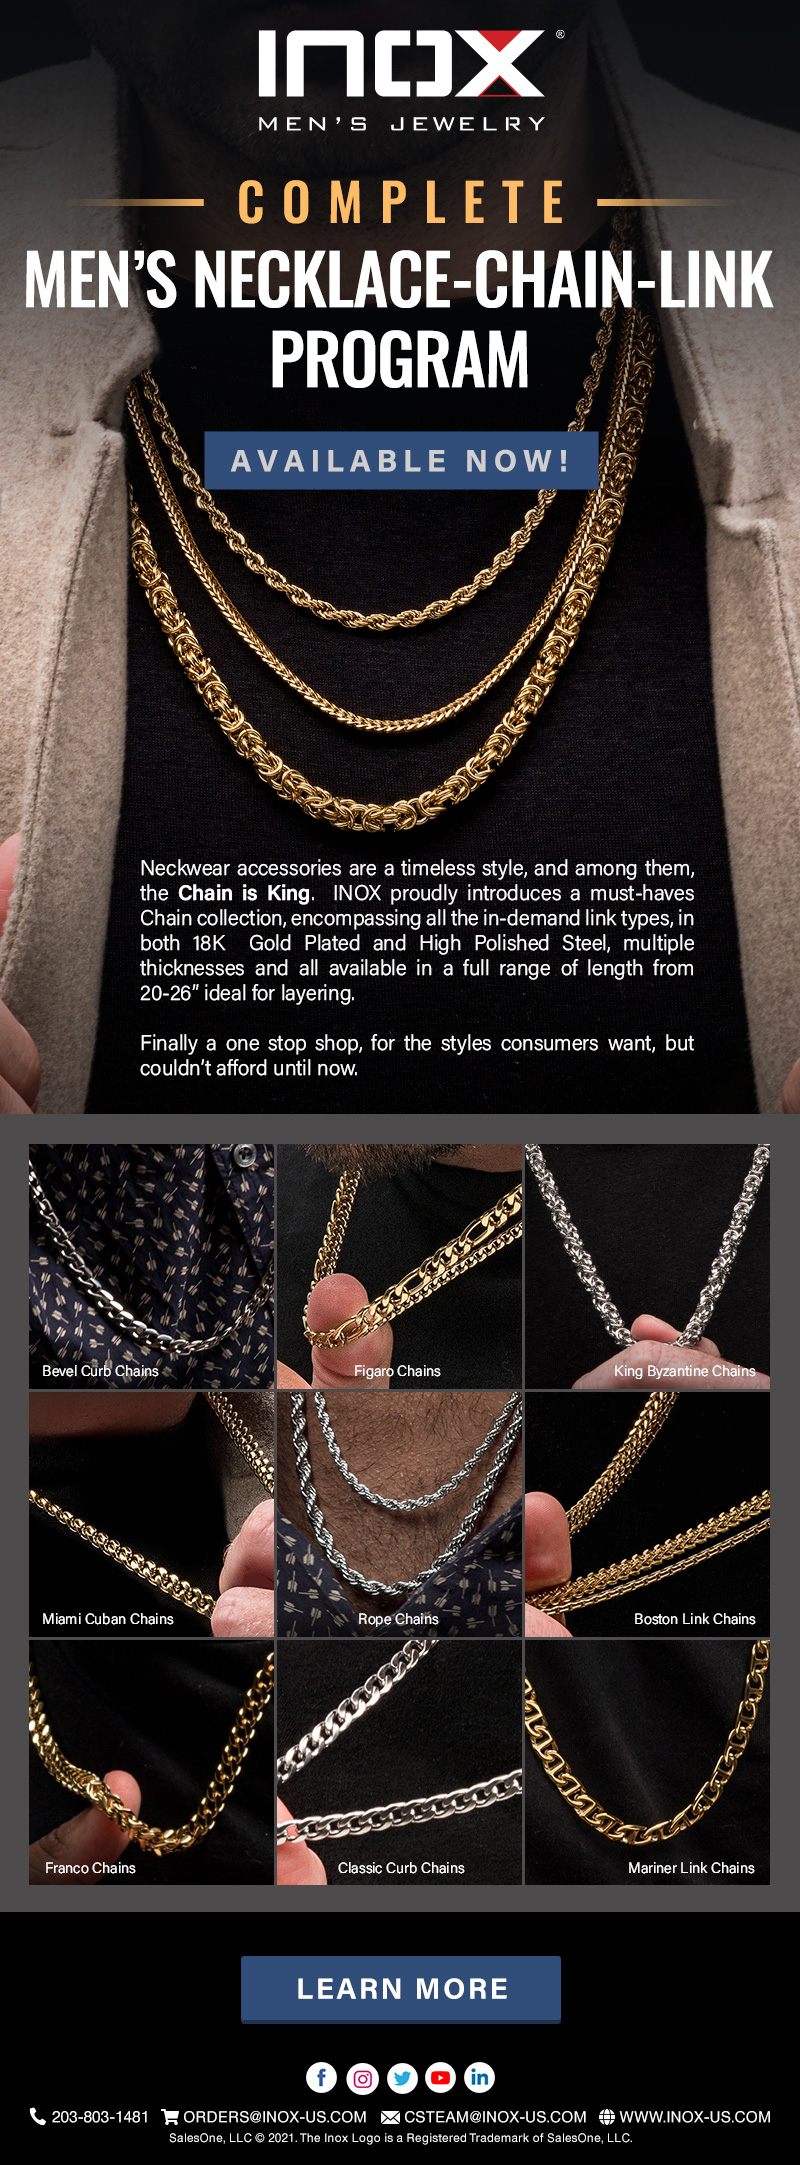 New, Complete Men's Necklace-Chain-LInk Program - Available now!